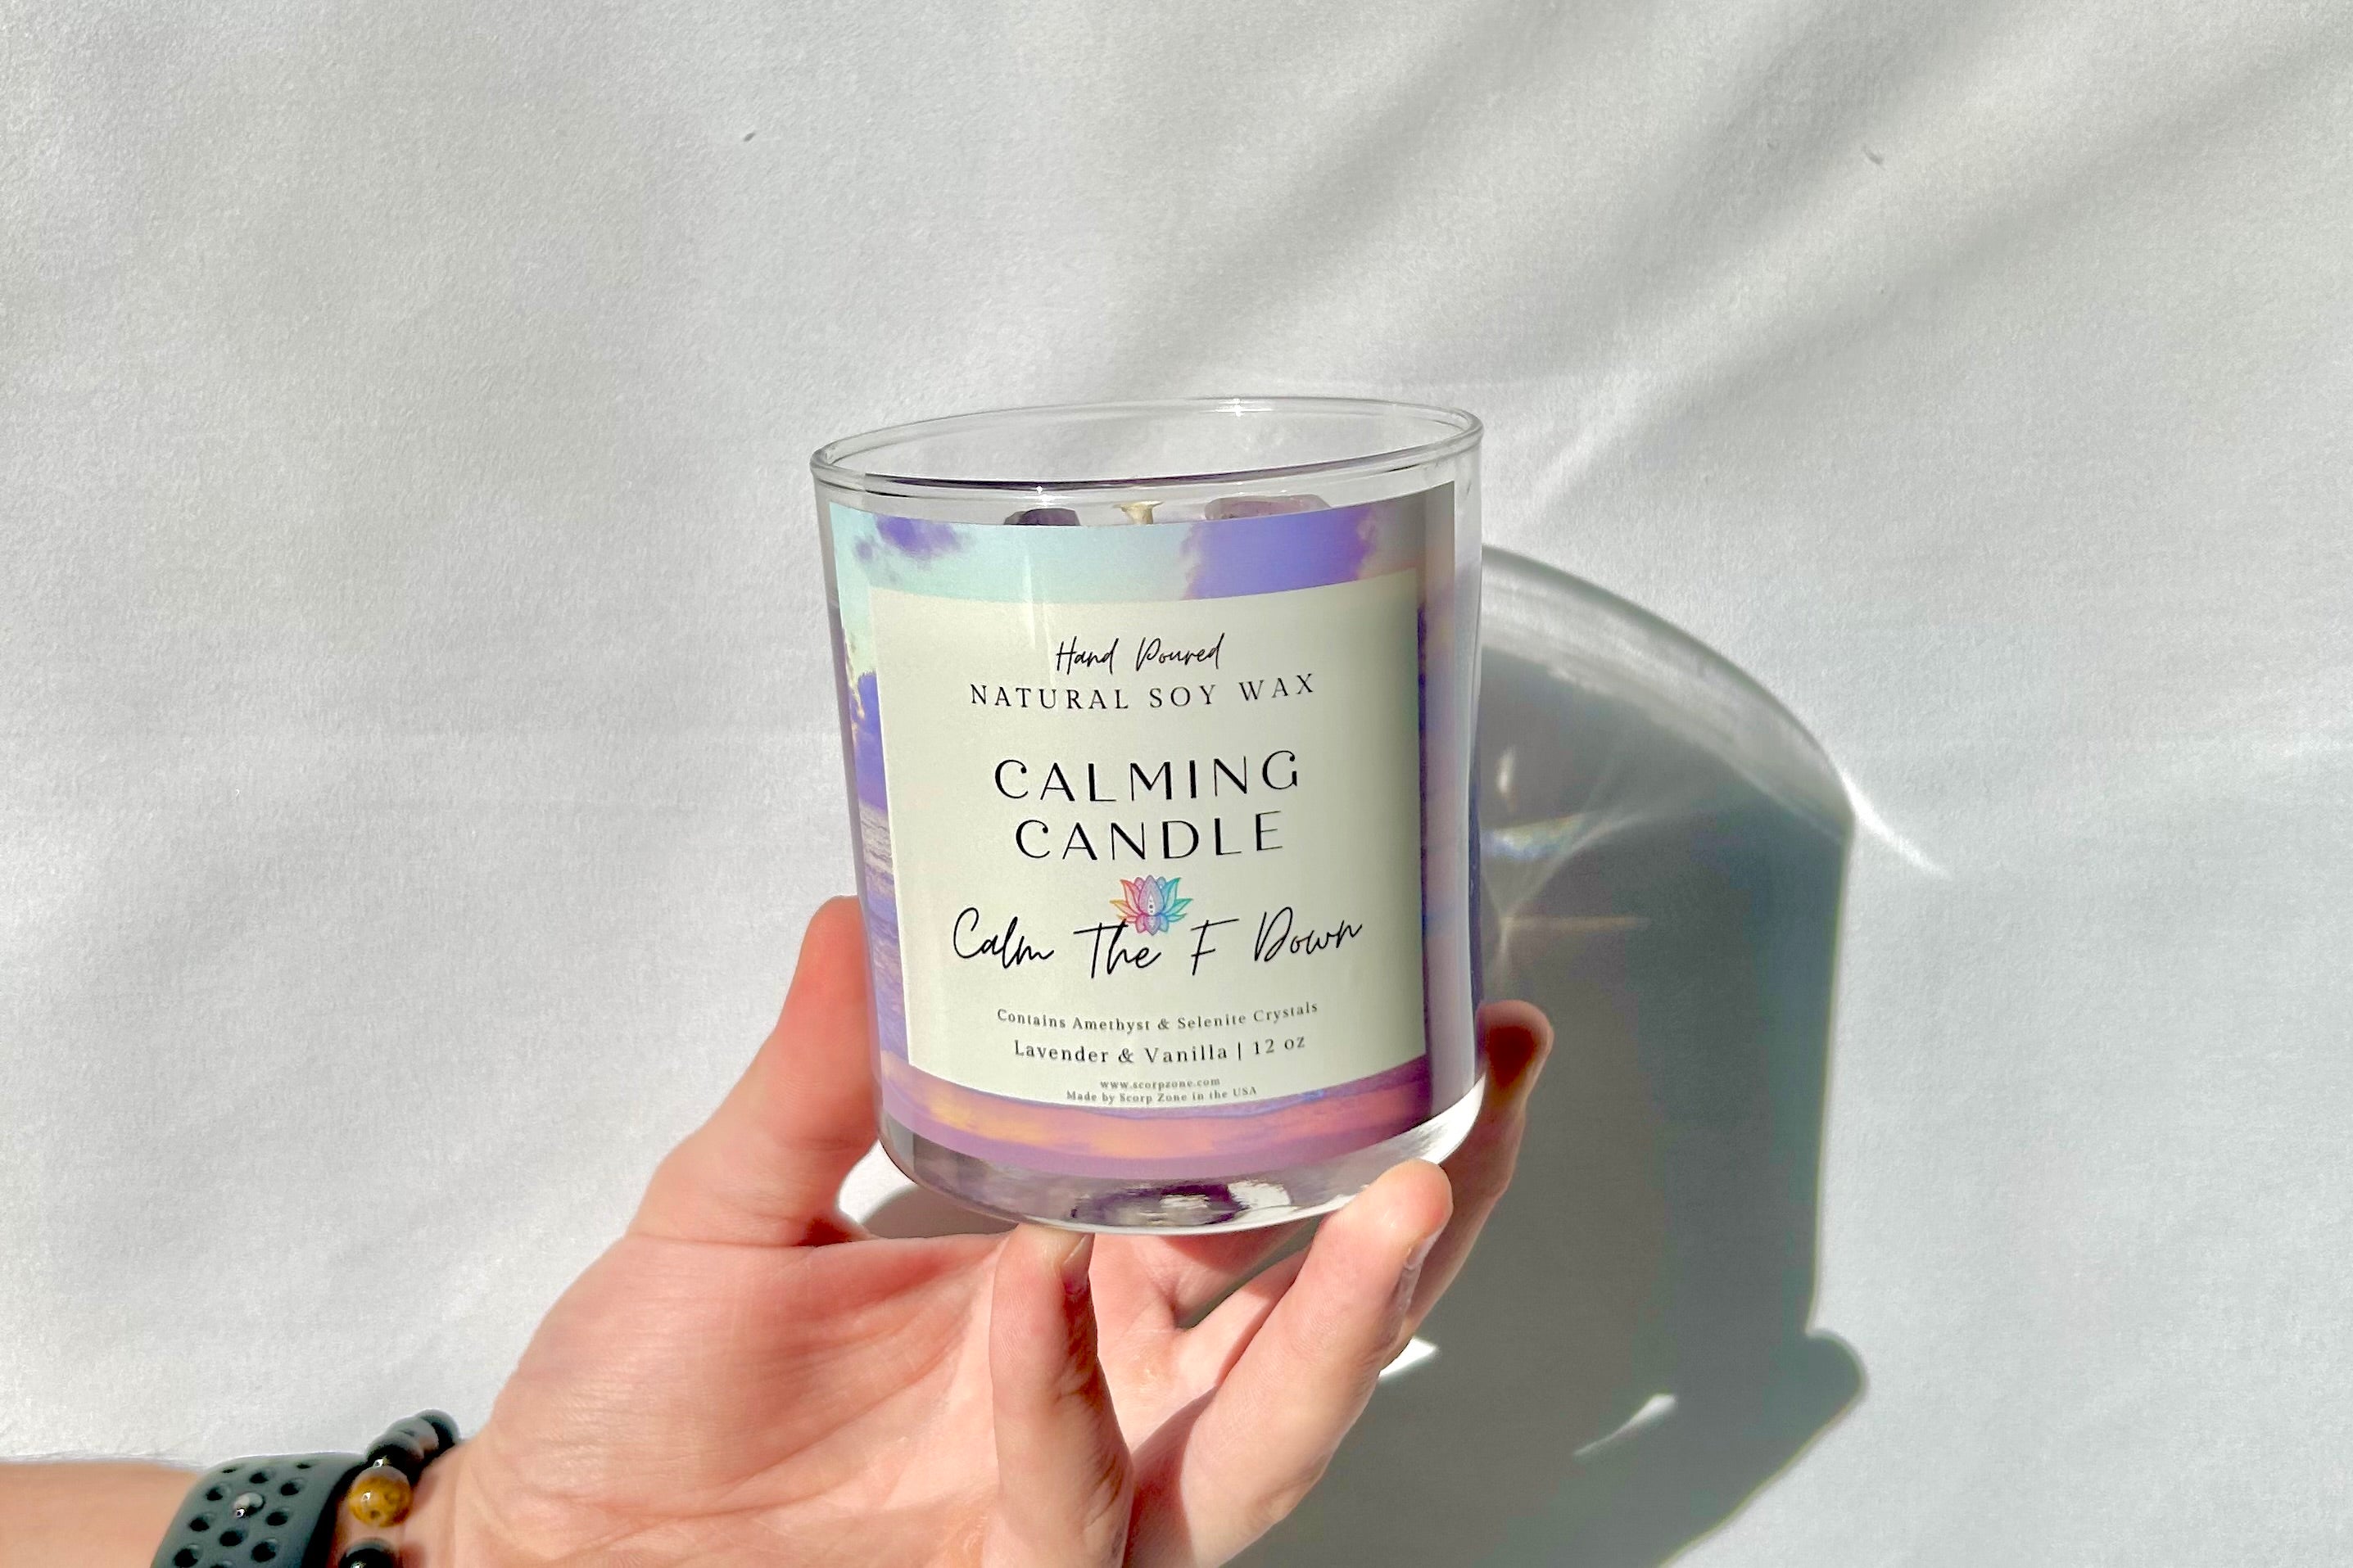 Calming Crystal Soy Wax Candle by Scorp Zone